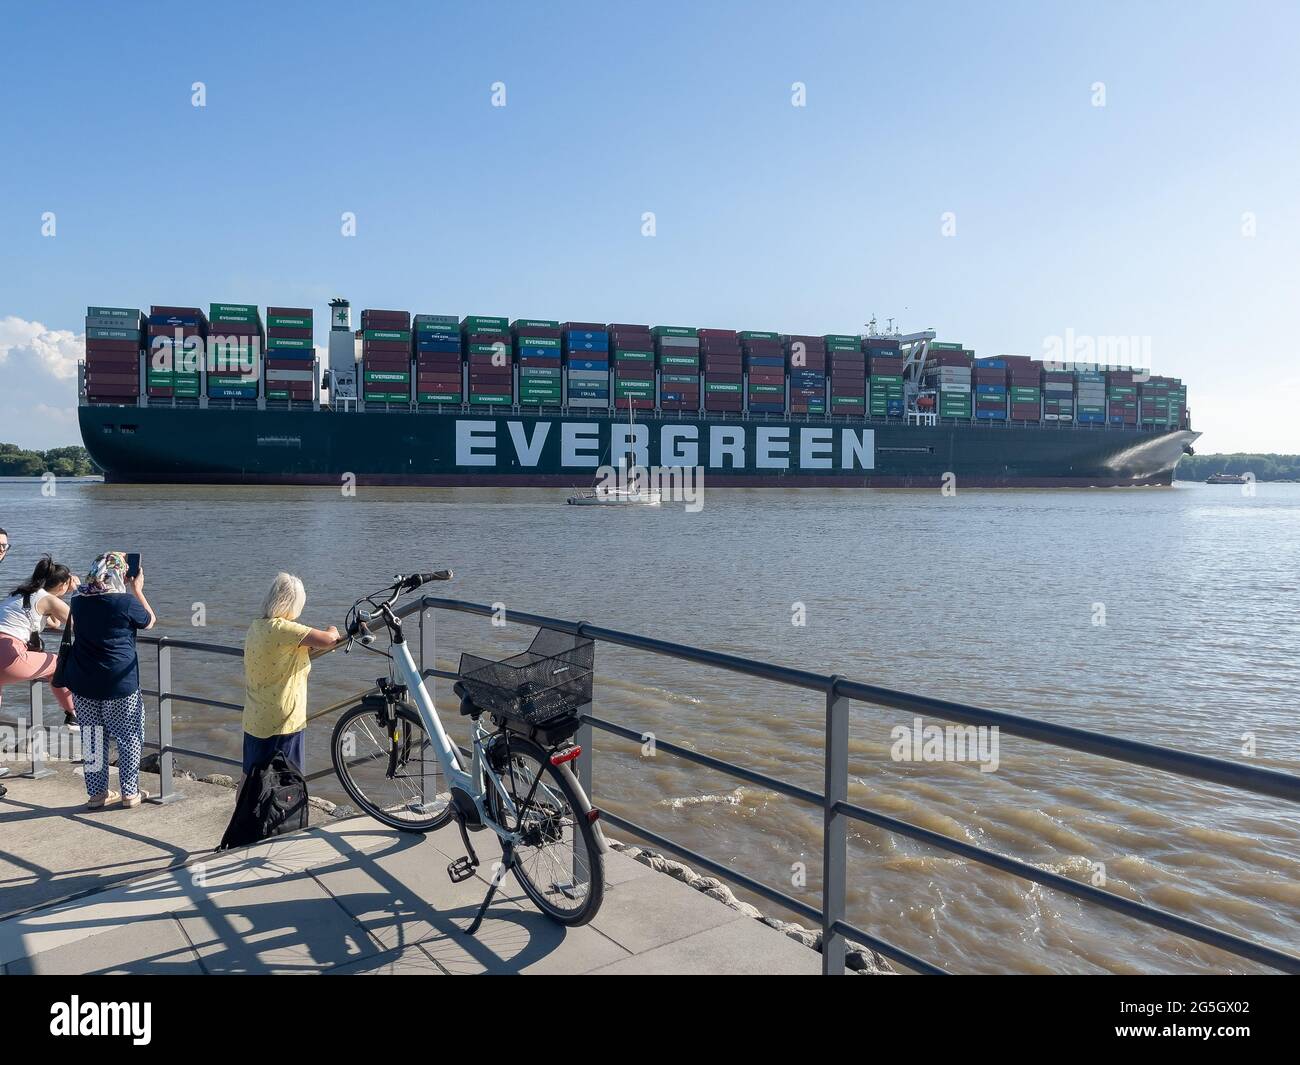 Page 2 - Fähre Elbe High Resolution Stock Photography and Images - Alamy